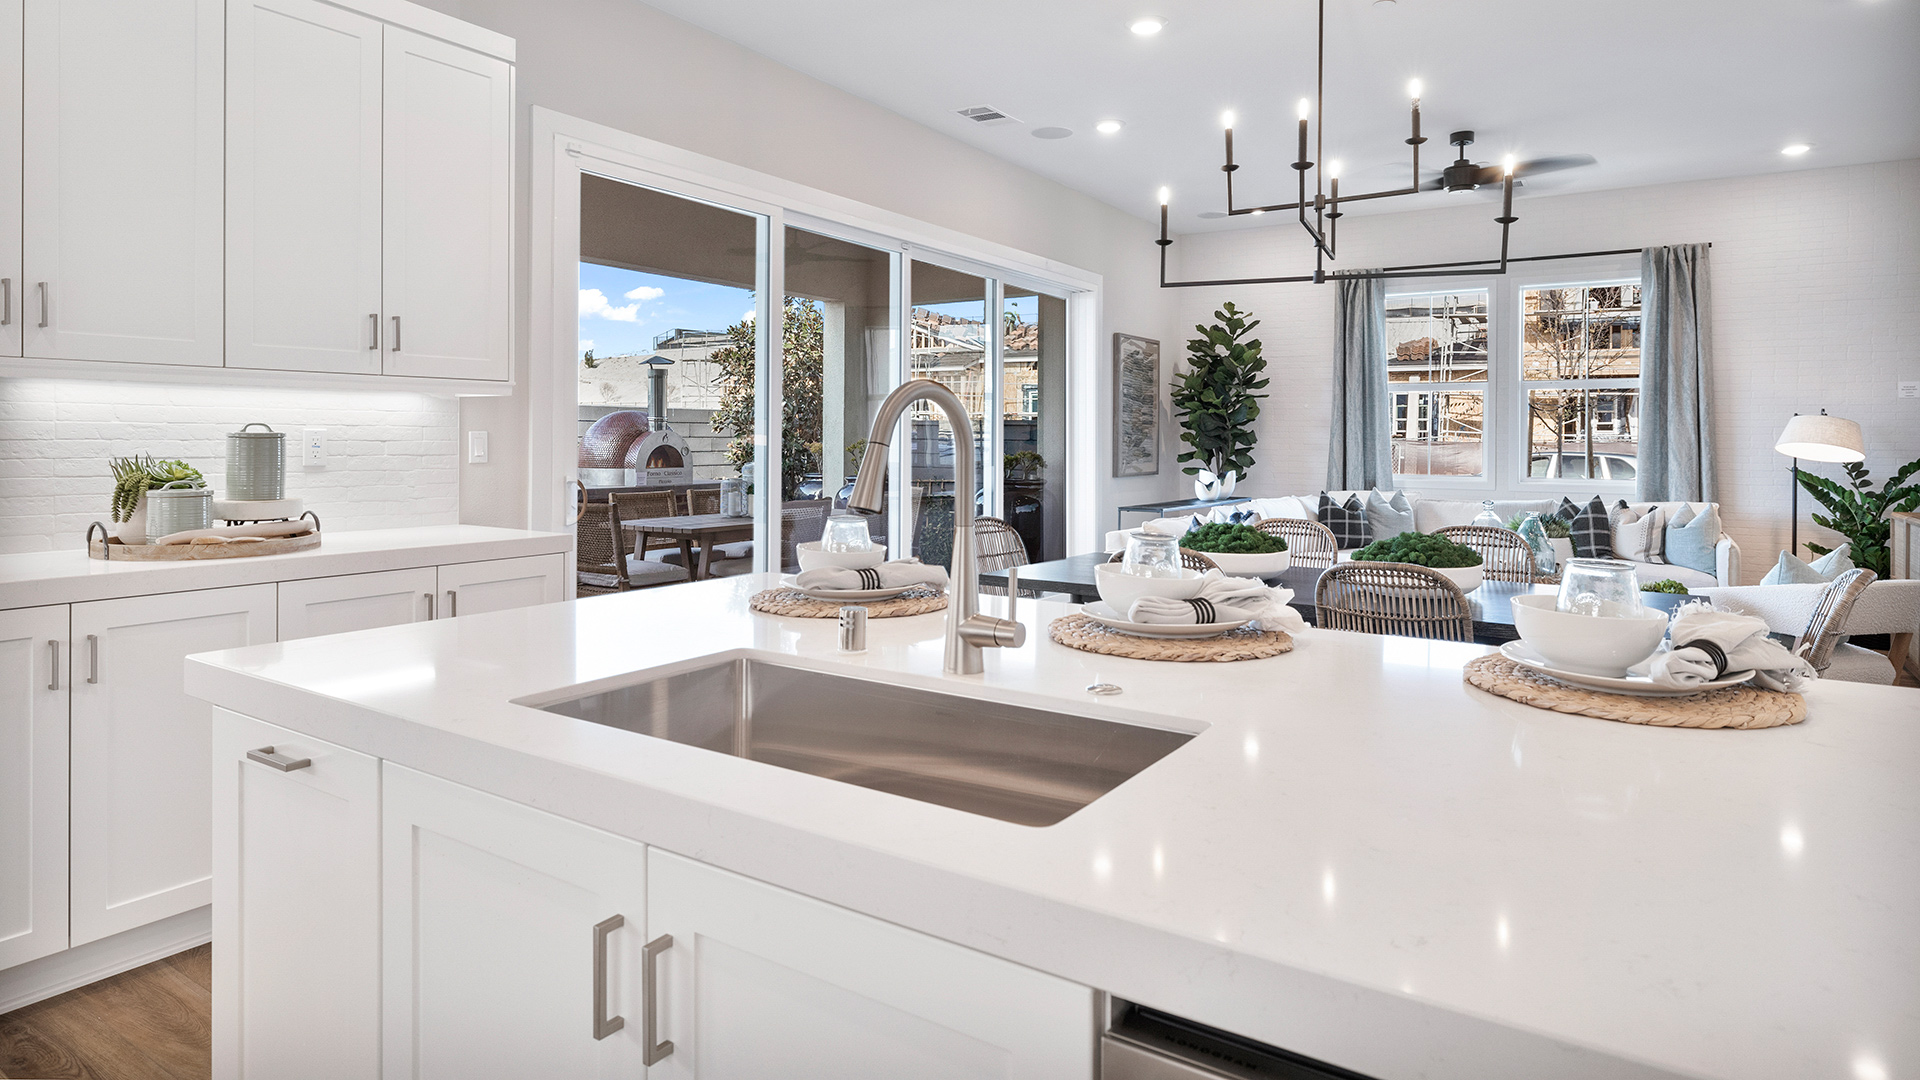 The Pearl at Rancho Mission Viejo kitchen island